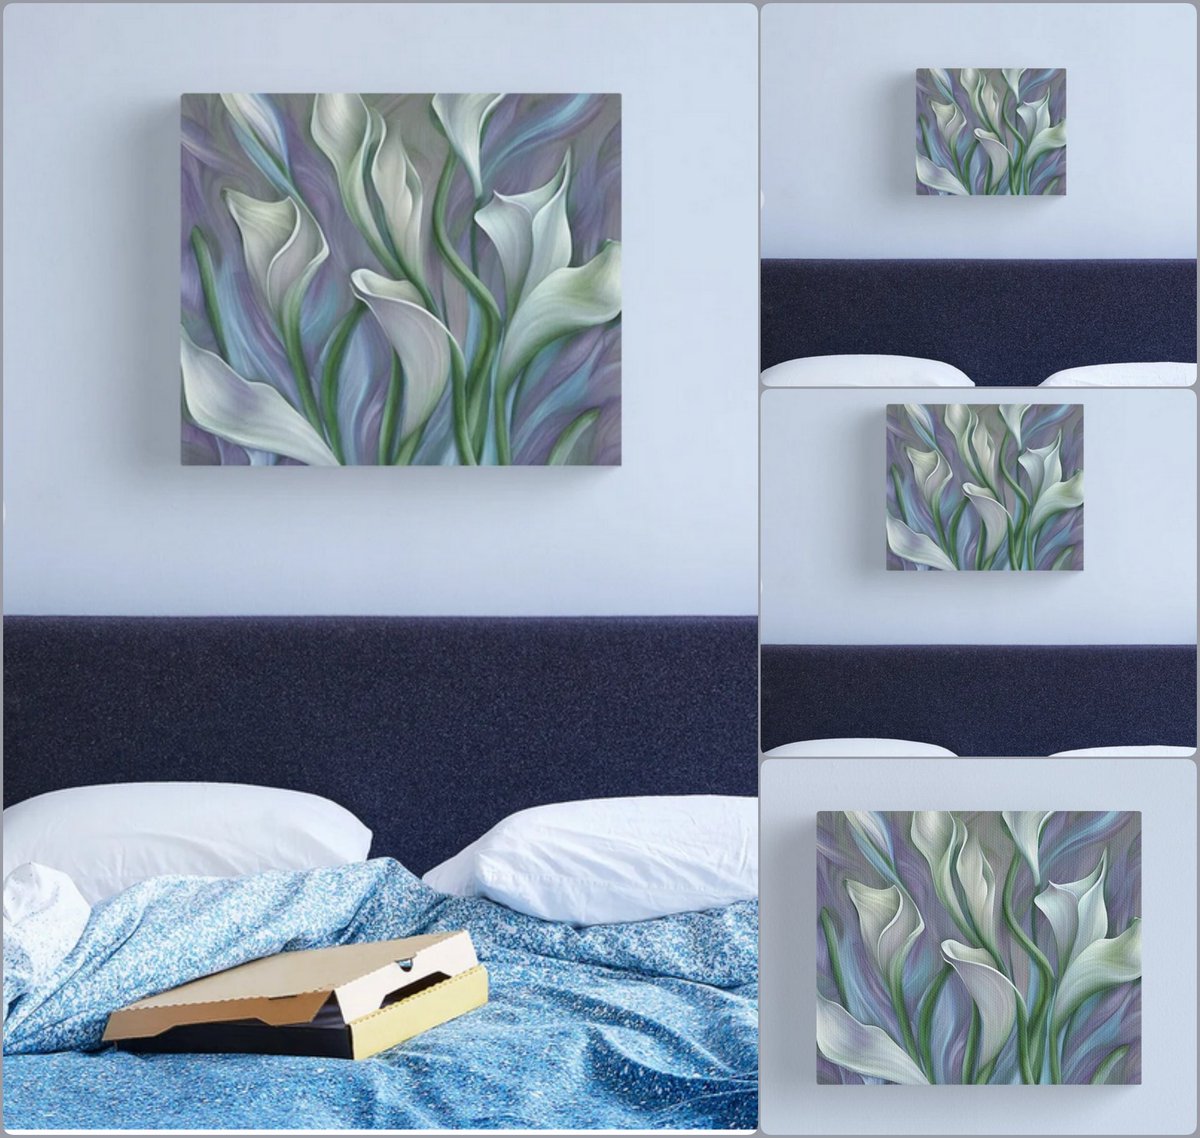 Calm Breeze Canvas Print~by Art Falaxy
~The Art of Uniqueness!~ #accents #wall #art #artfalaxy #canvas #framed #metal #posters #prints #redbubble #tapestry #wood #trendy #modern #FindYourThing #blue #white #green #purple

redbubble.com/i/canvas-print…